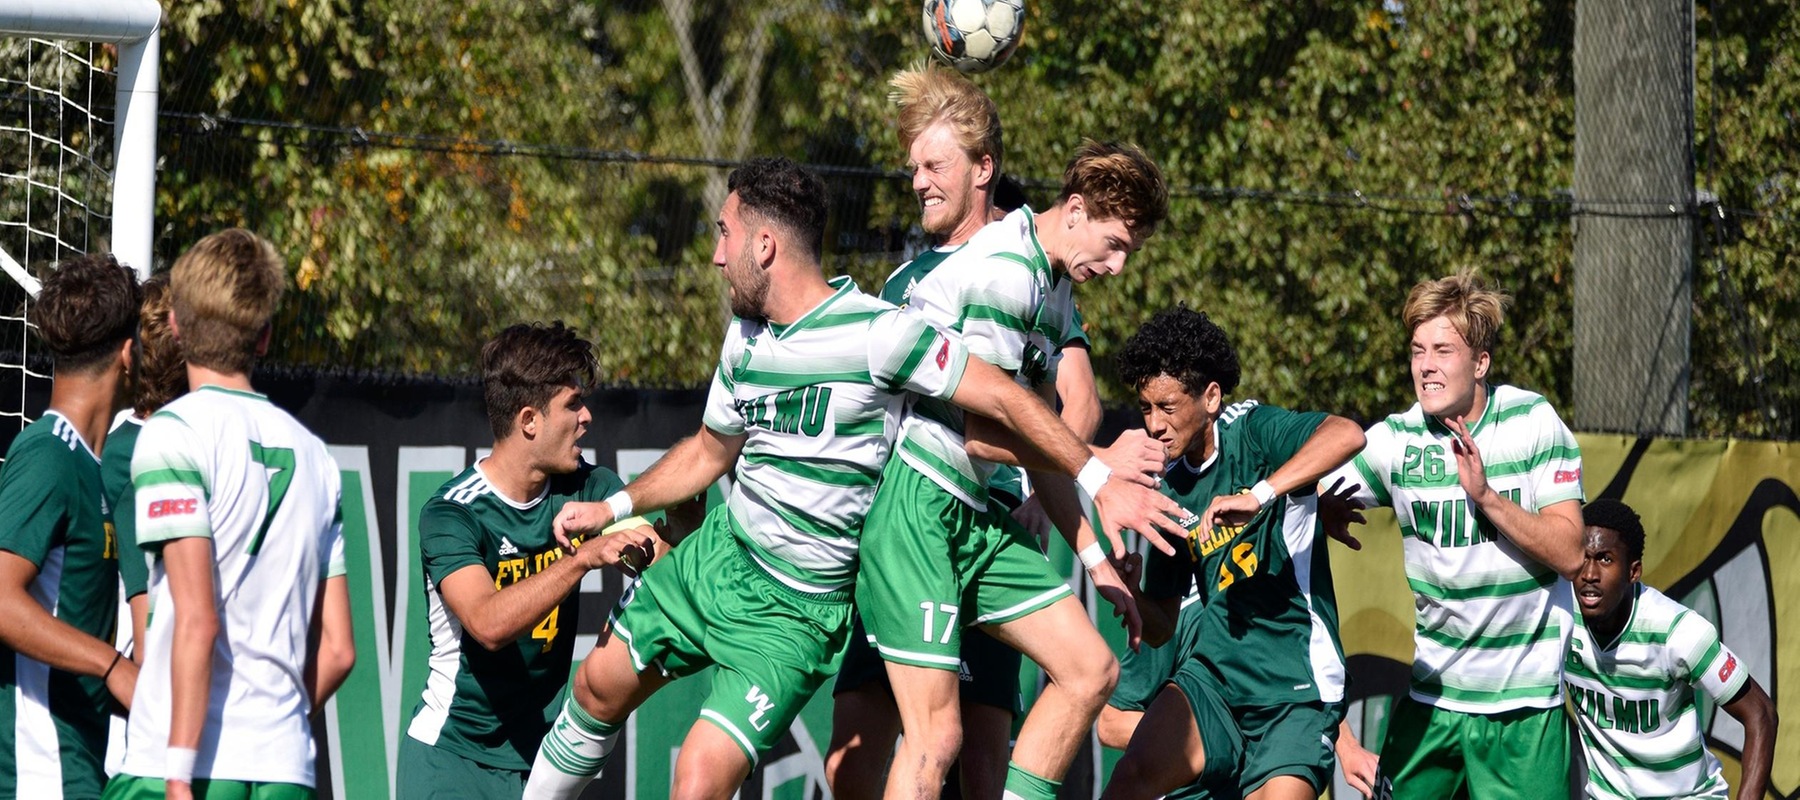 Wilmington University’s players battle Felician University players for a header during their NCAA Mens soccer match at the Wilmington University Sports complex in Newark, Delaware, October 15, 2022. Photo By Amanda Angell